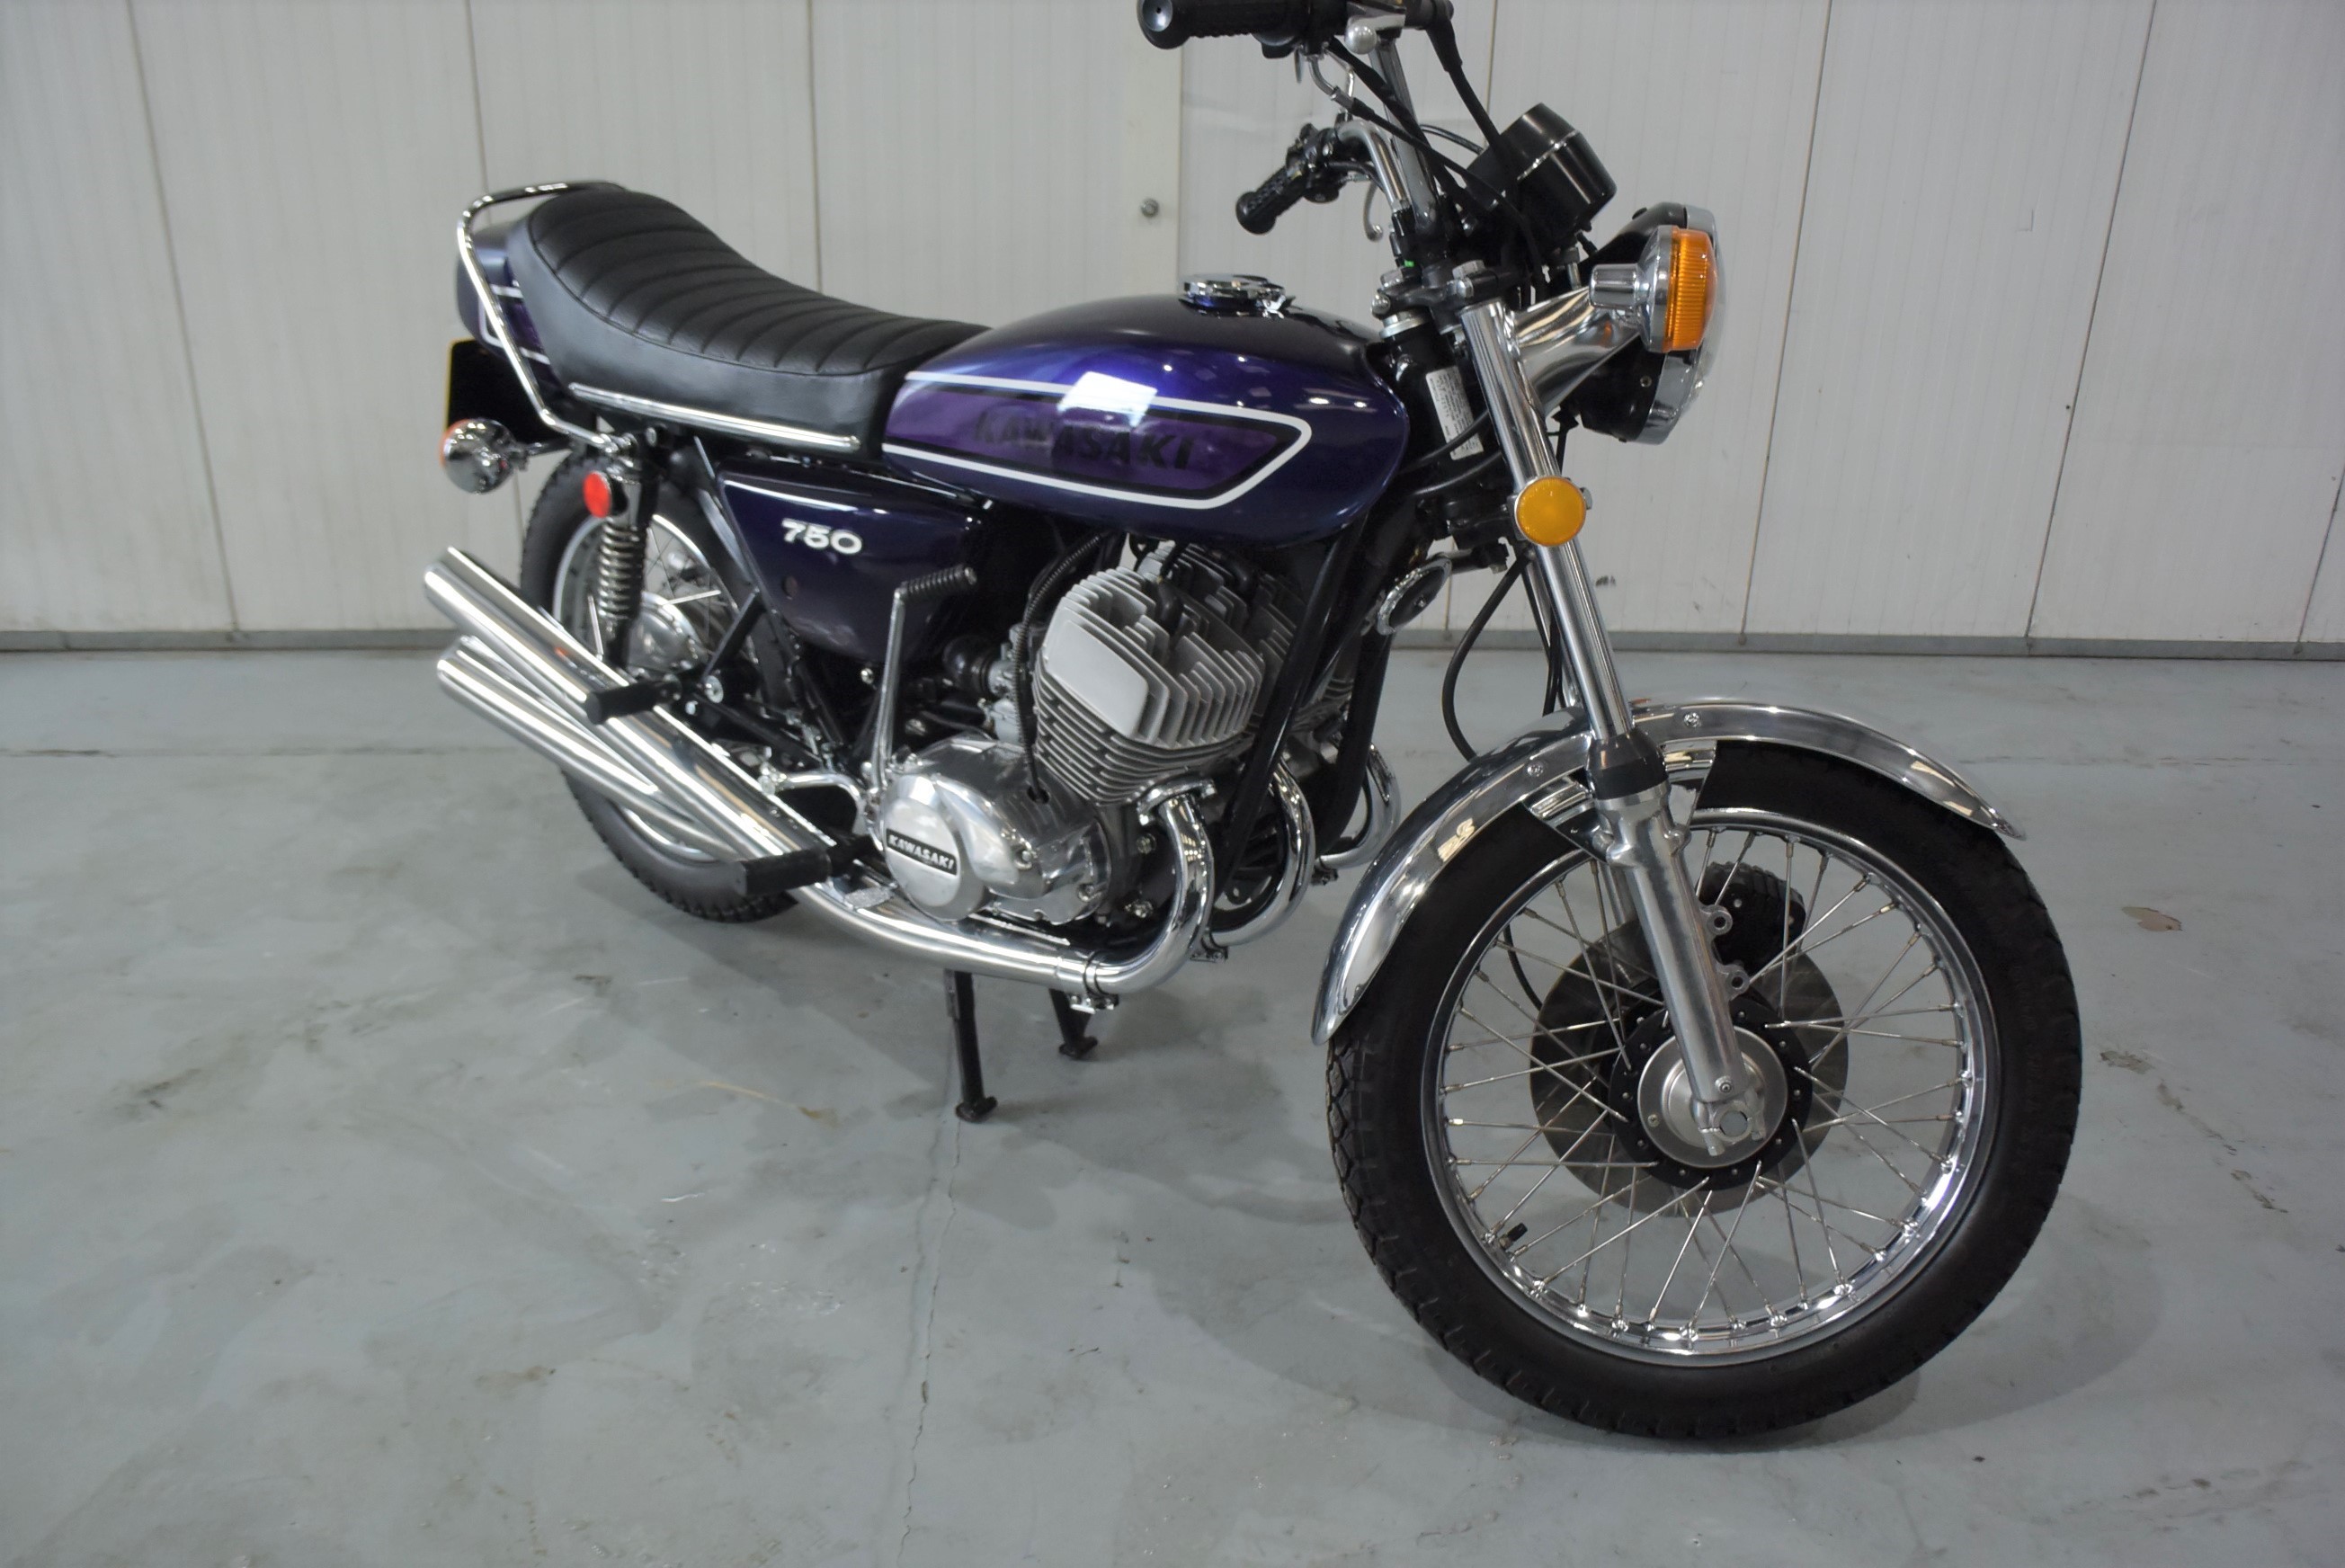 Classic Kawasaki Motorcycle for sale H&H Classics Auction 27th October